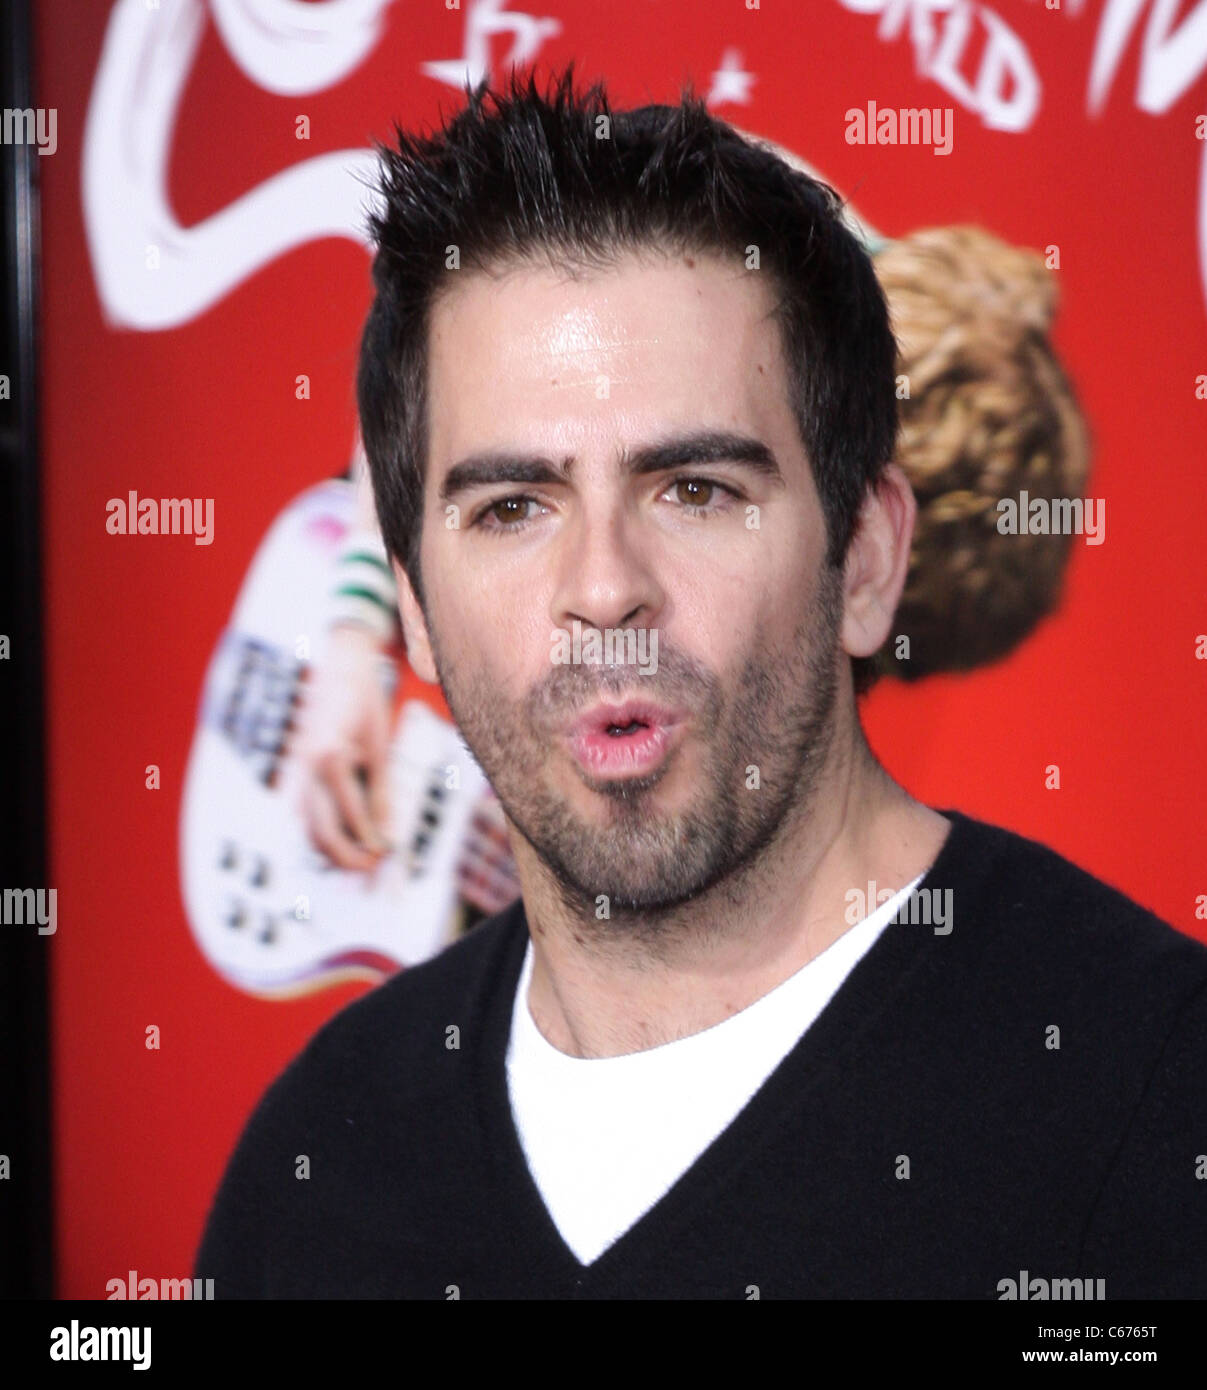 Eli Roth at arrivals for Scott Pilgrim vs. The World Premiere, Grauman's Chinese Theatre, Los Angeles, CA July 27, 2010. Photo By: Adam Orchon/Everett Collection Stock Photo